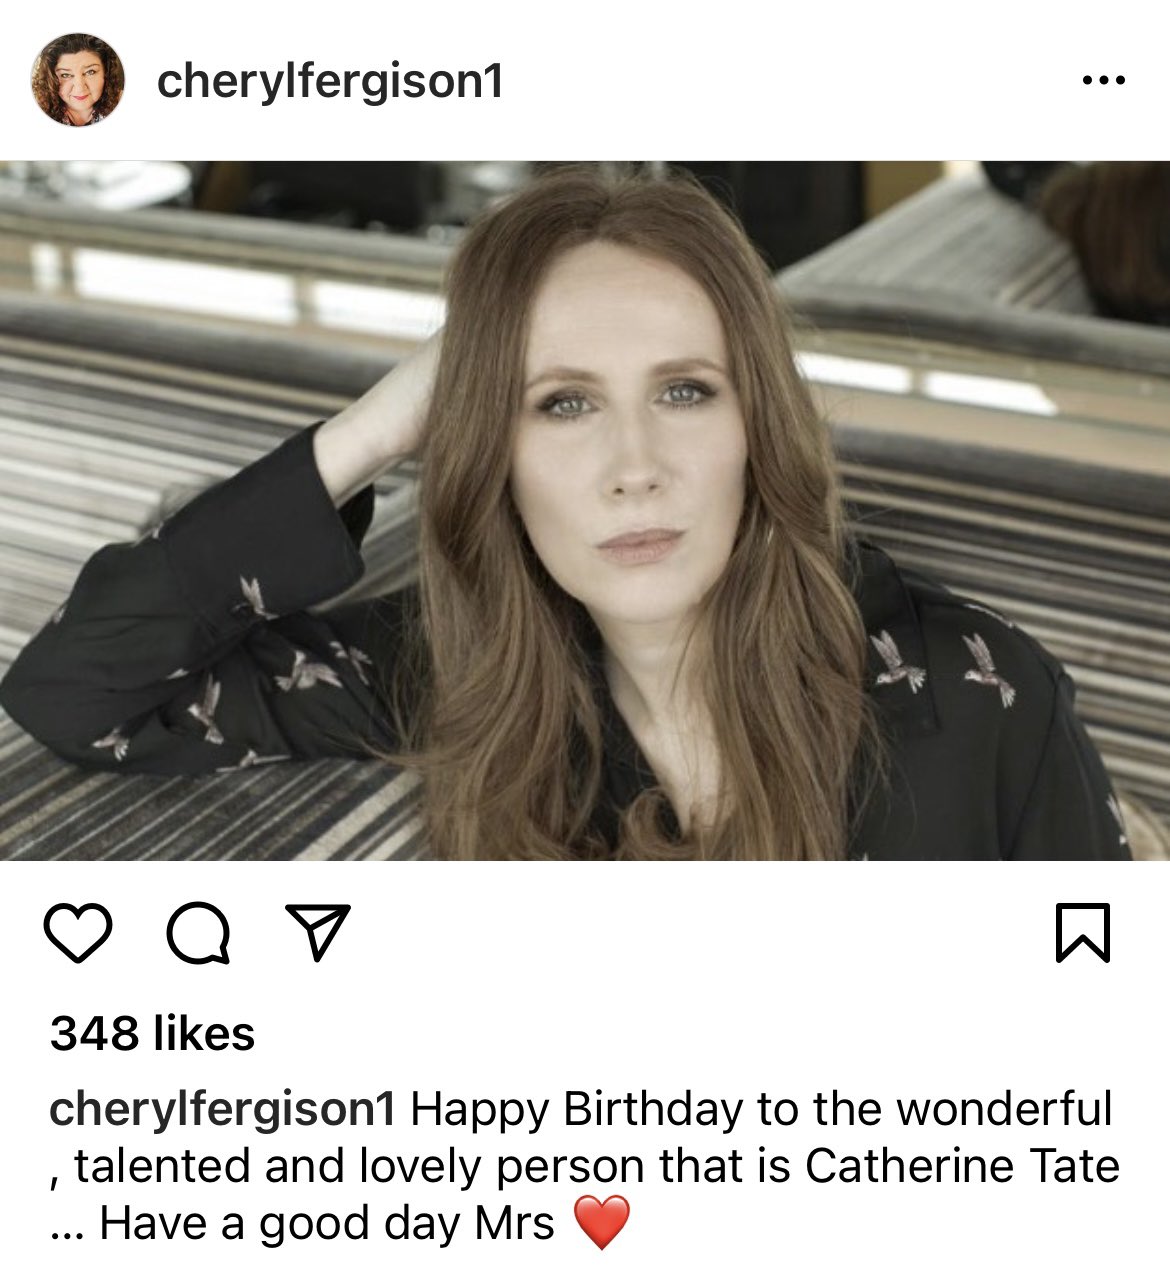 Obsessed with Cheryl Fergison wishing Catherine Tate a happy birthday 7 months early 